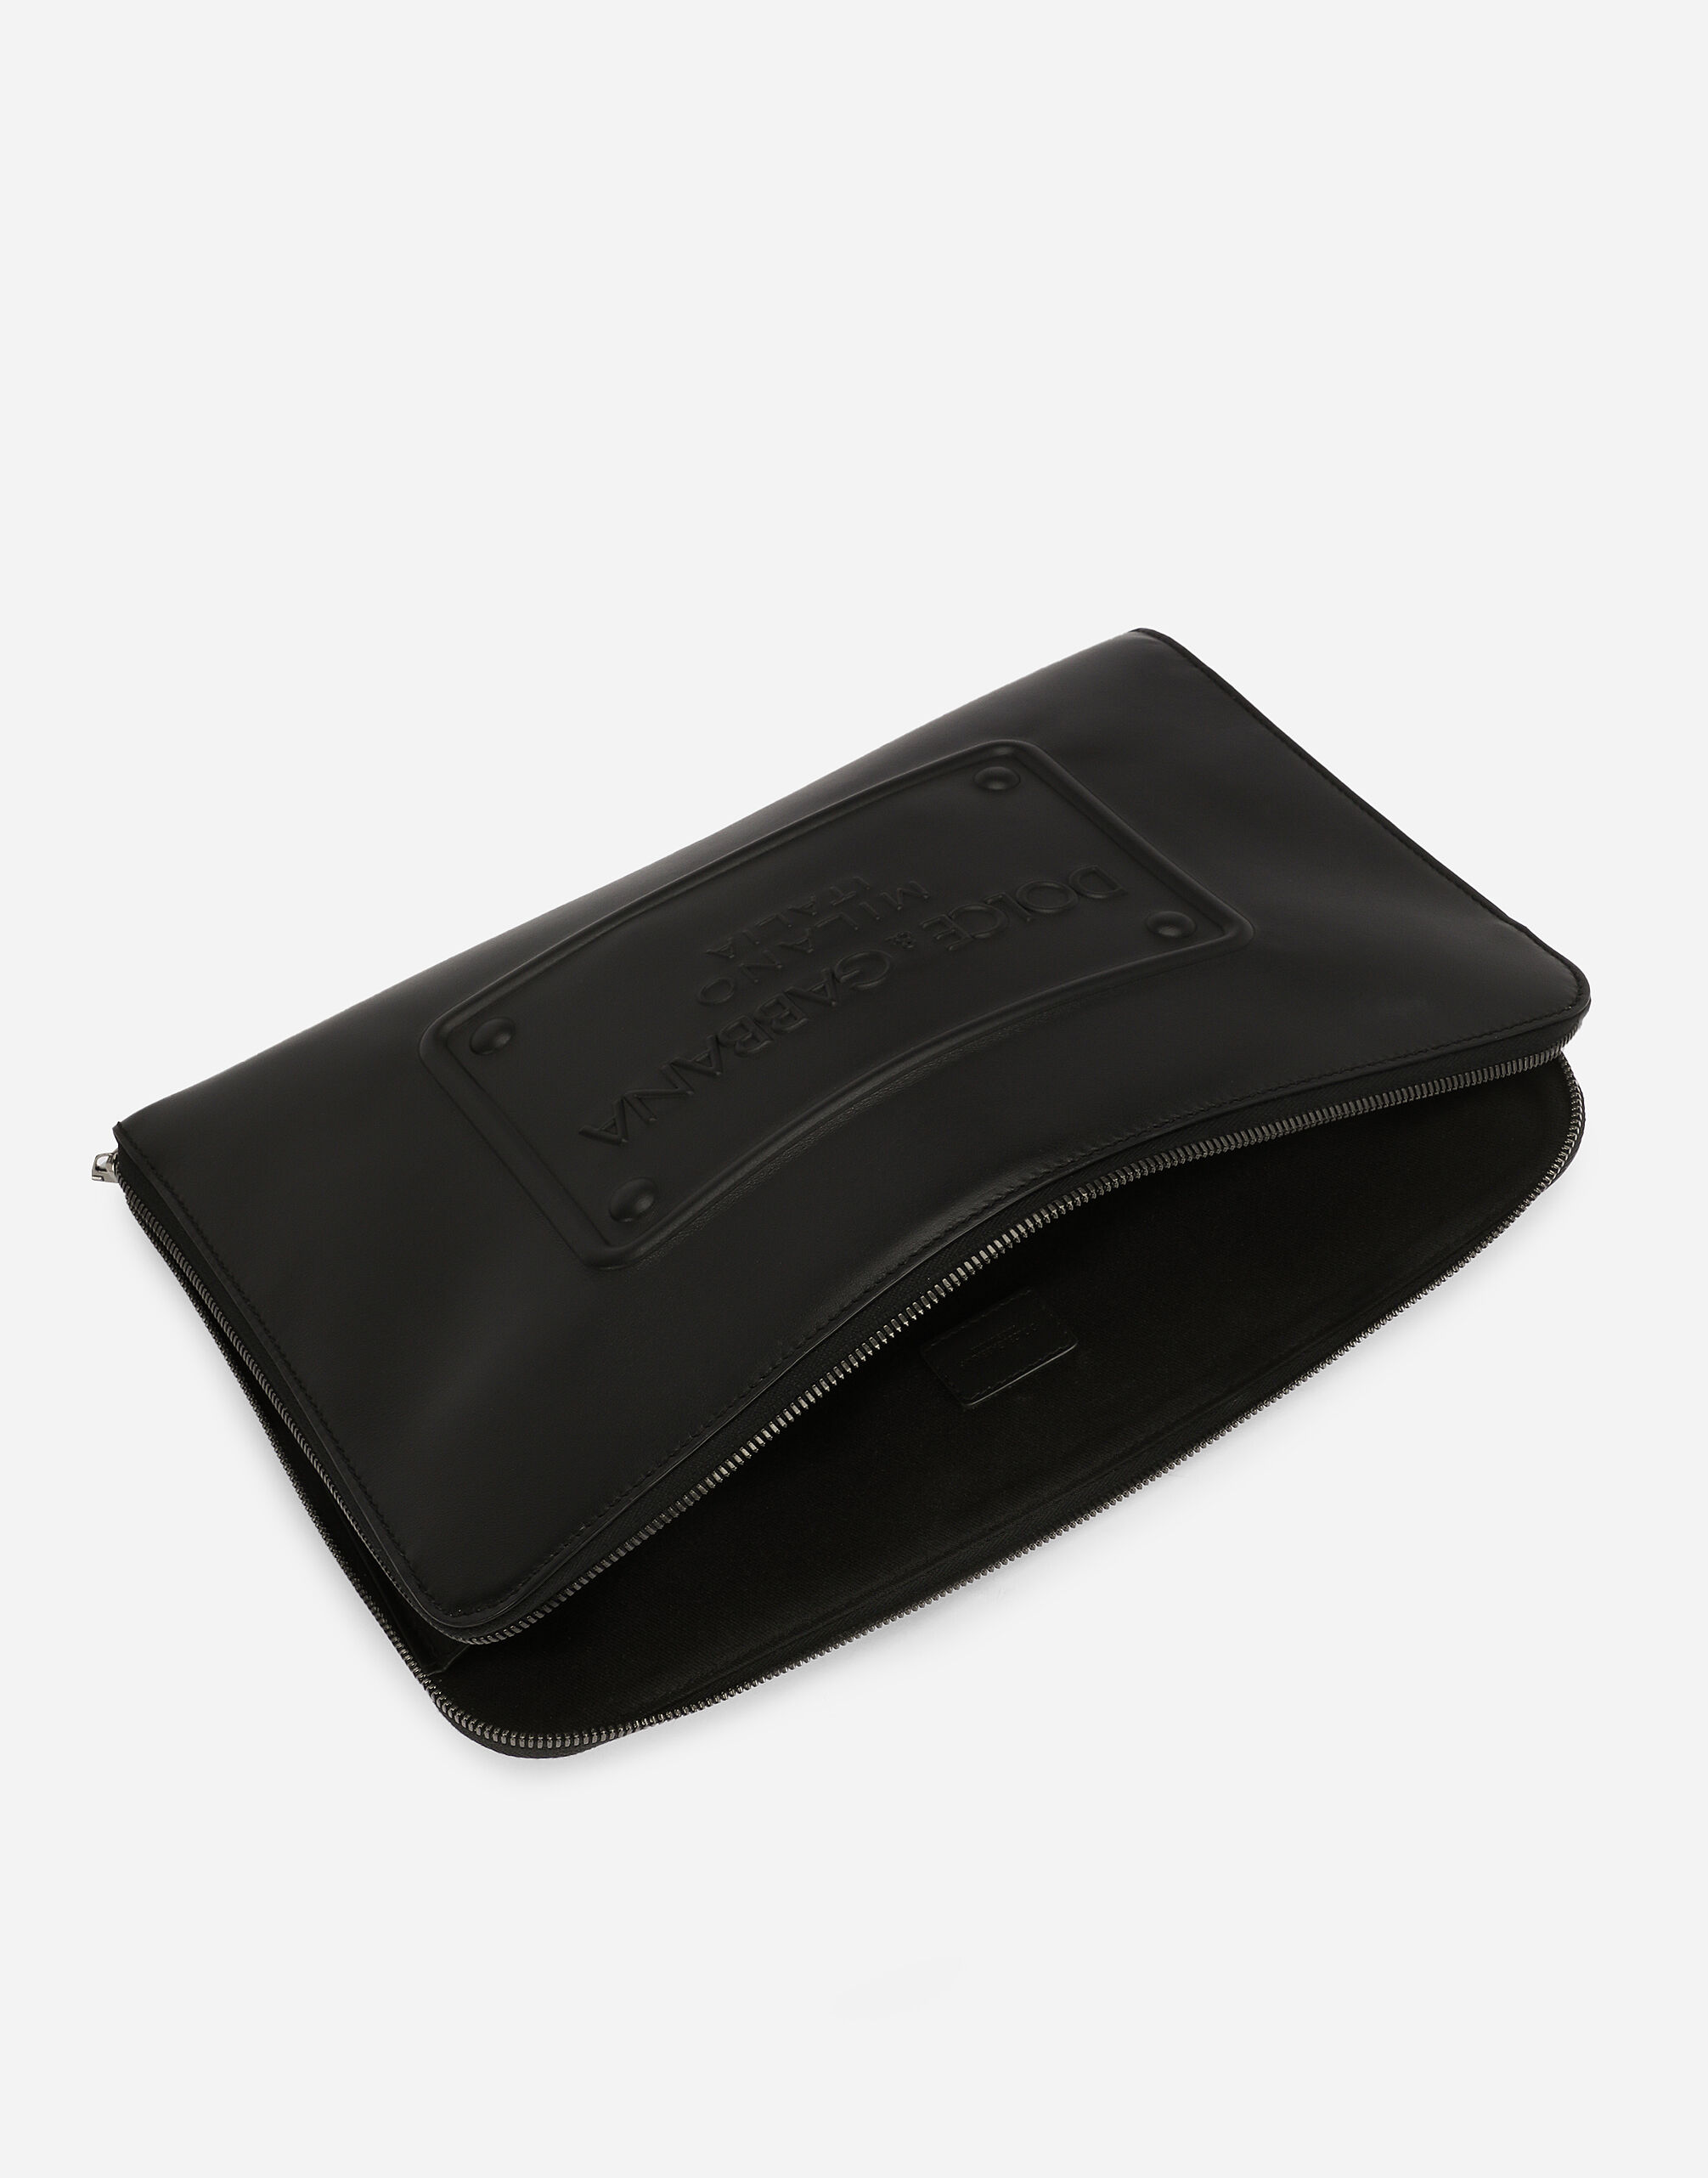 Large calfskin pouch with raised logo